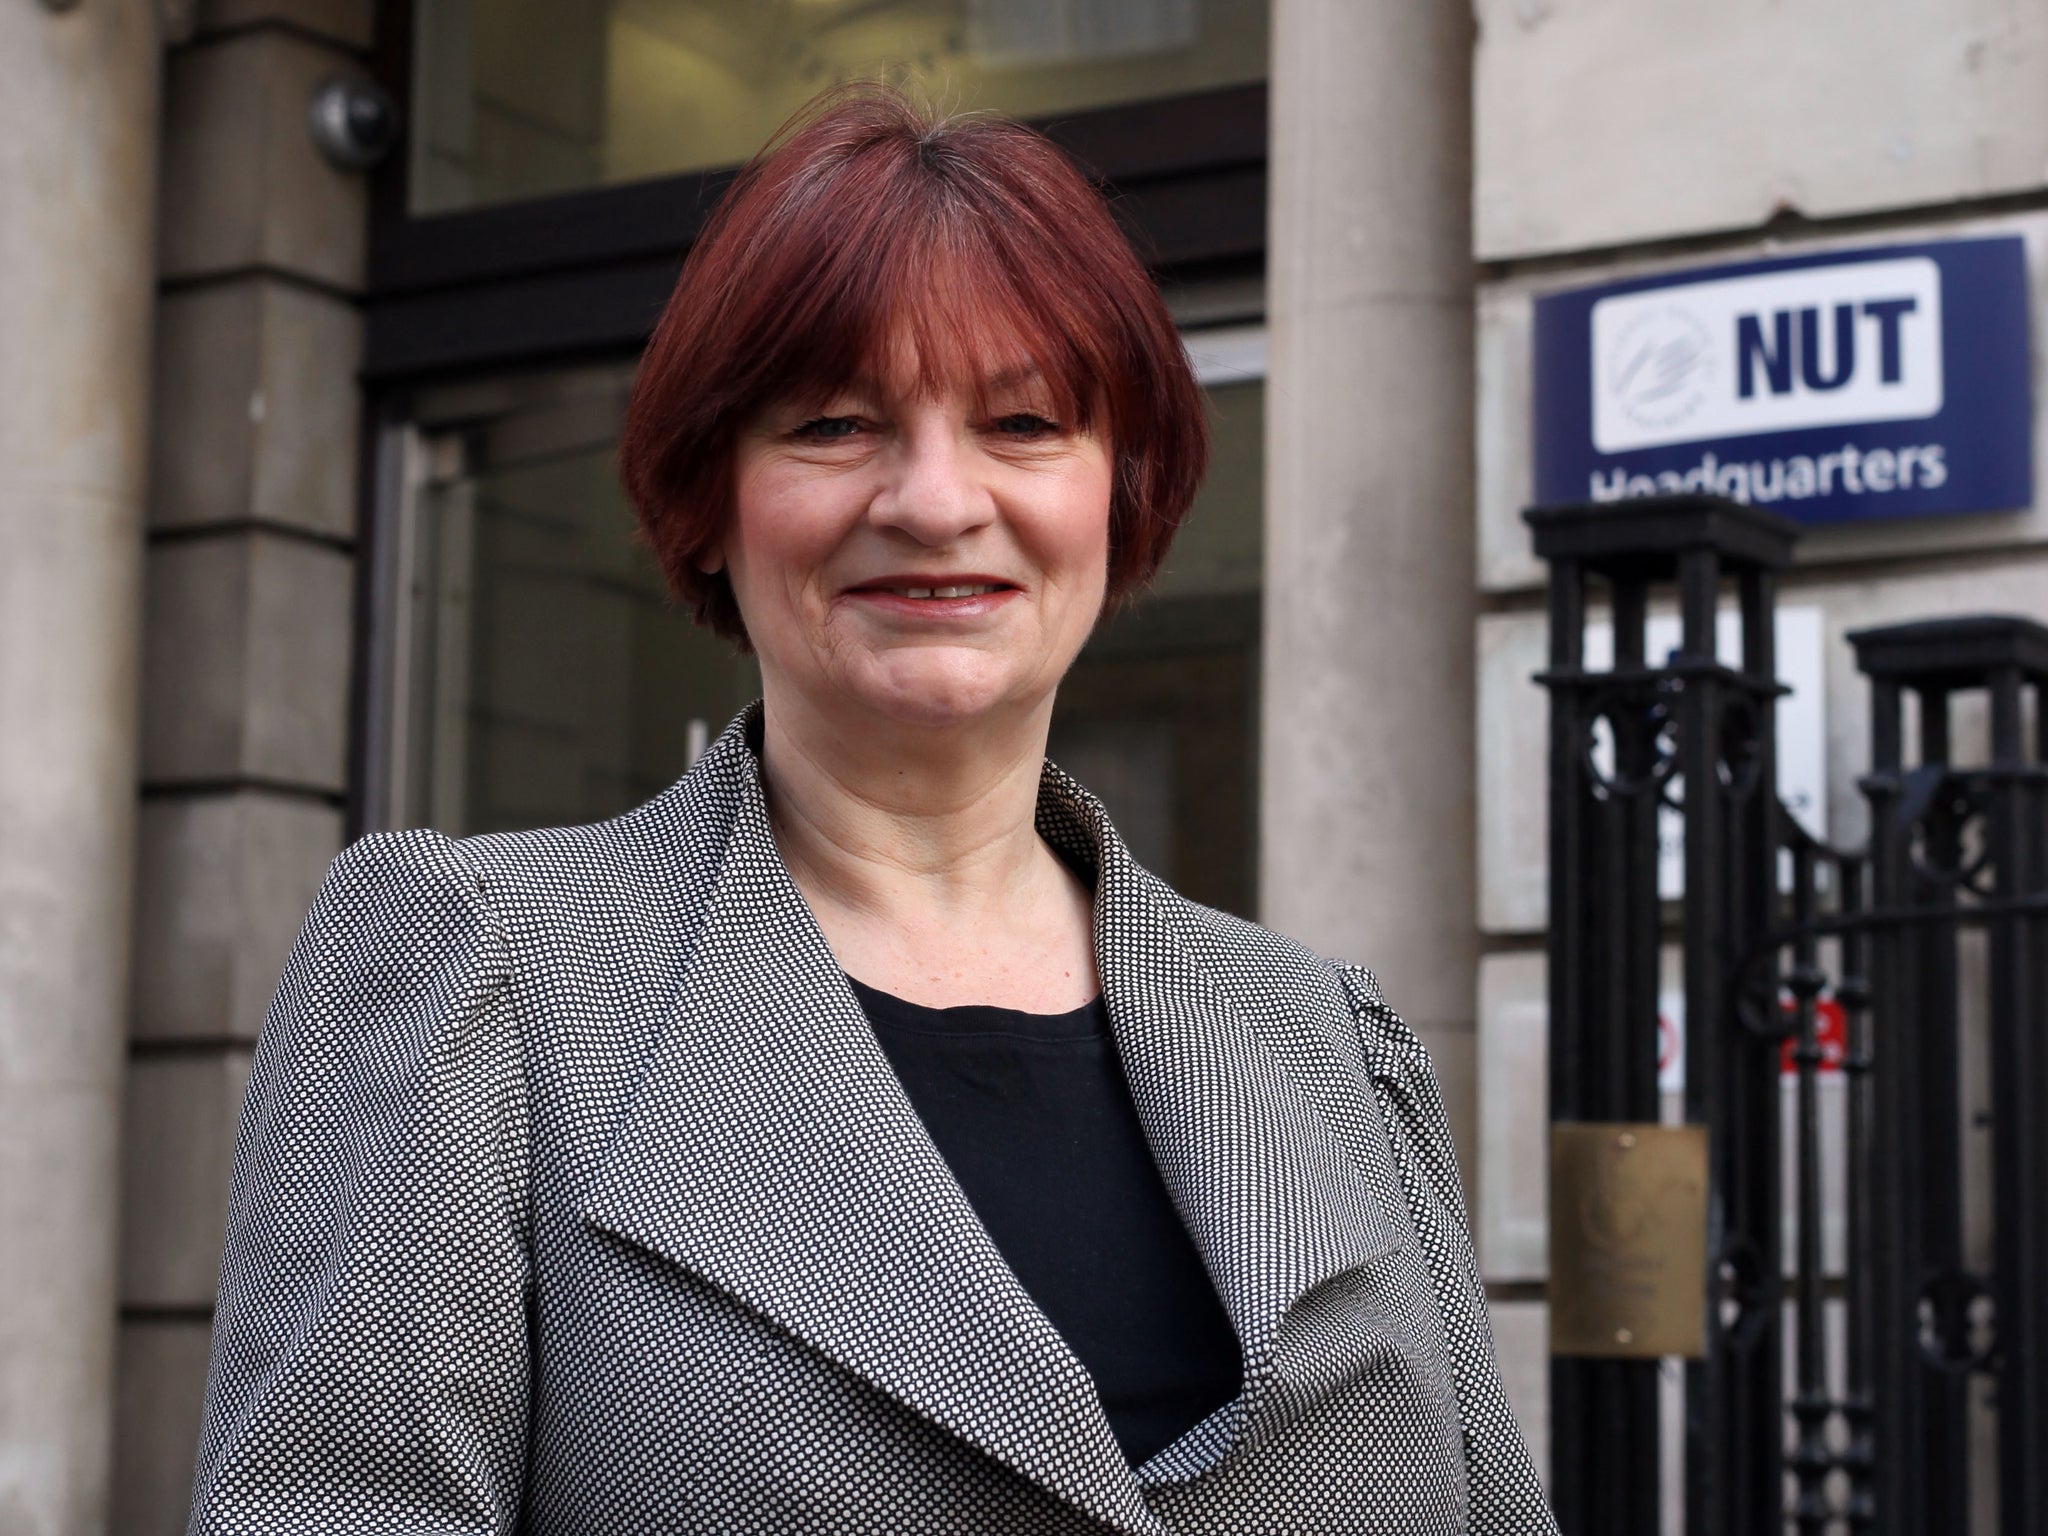 Christine Blower, the NUT leader, said her organisation would embark on a series of strikes over Gove’s ‘fixed’ reforms